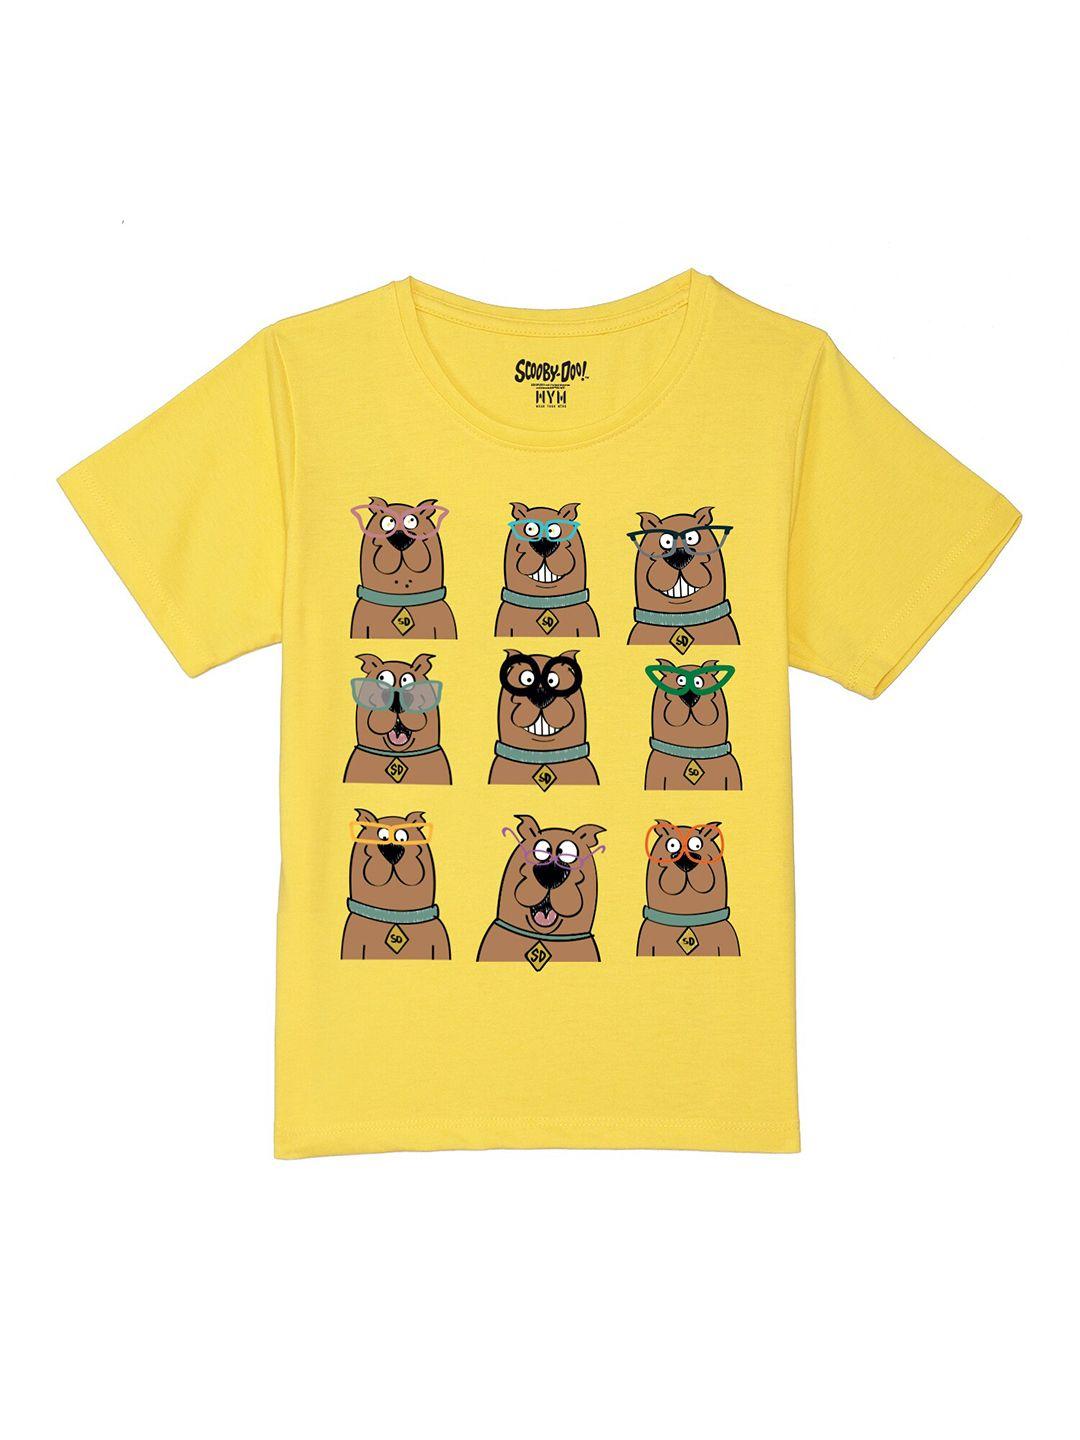 wear your mind boys printed scooby doo pure cotton t-shirt